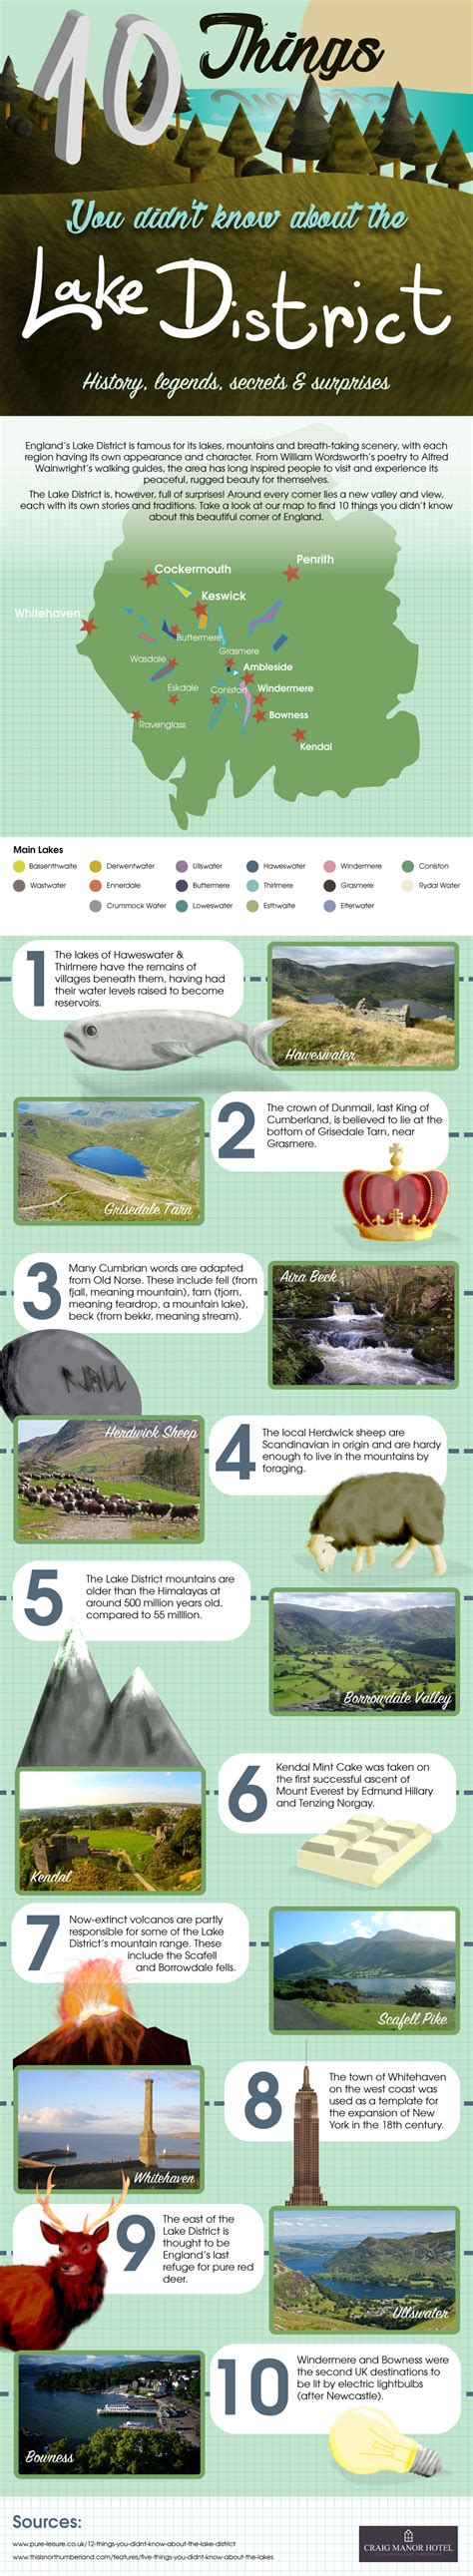 didnt   englands lake district infographic